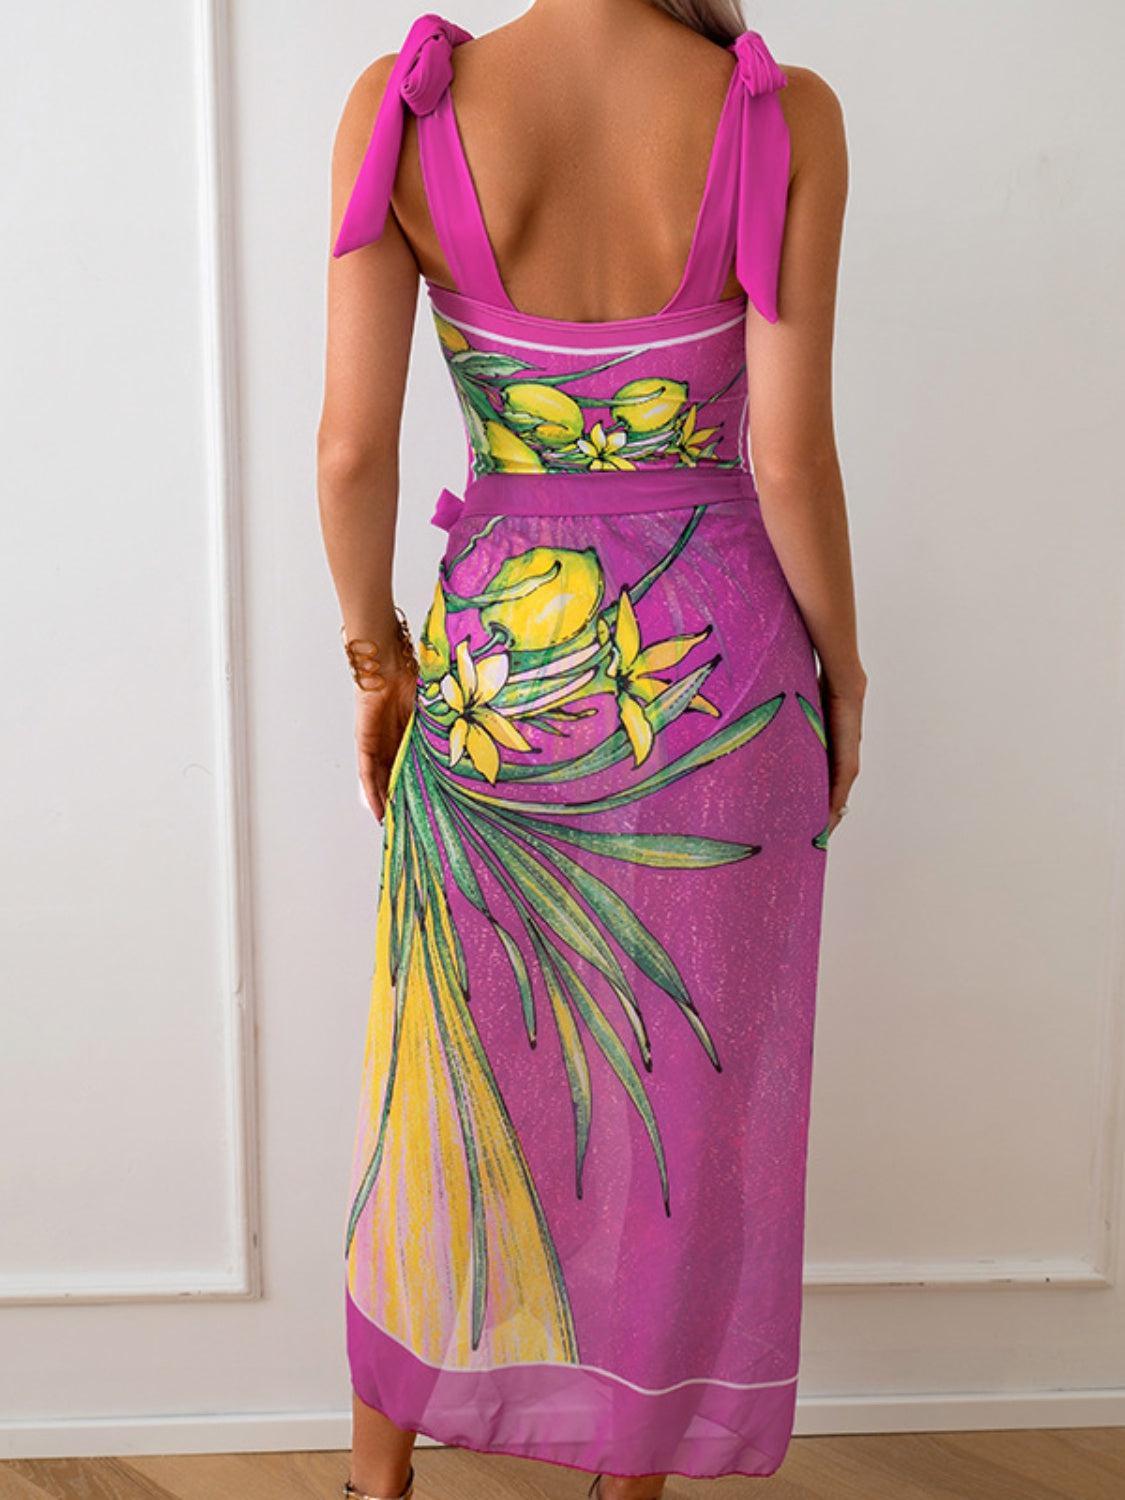 a woman wearing a purple dress with yellow flowers on it